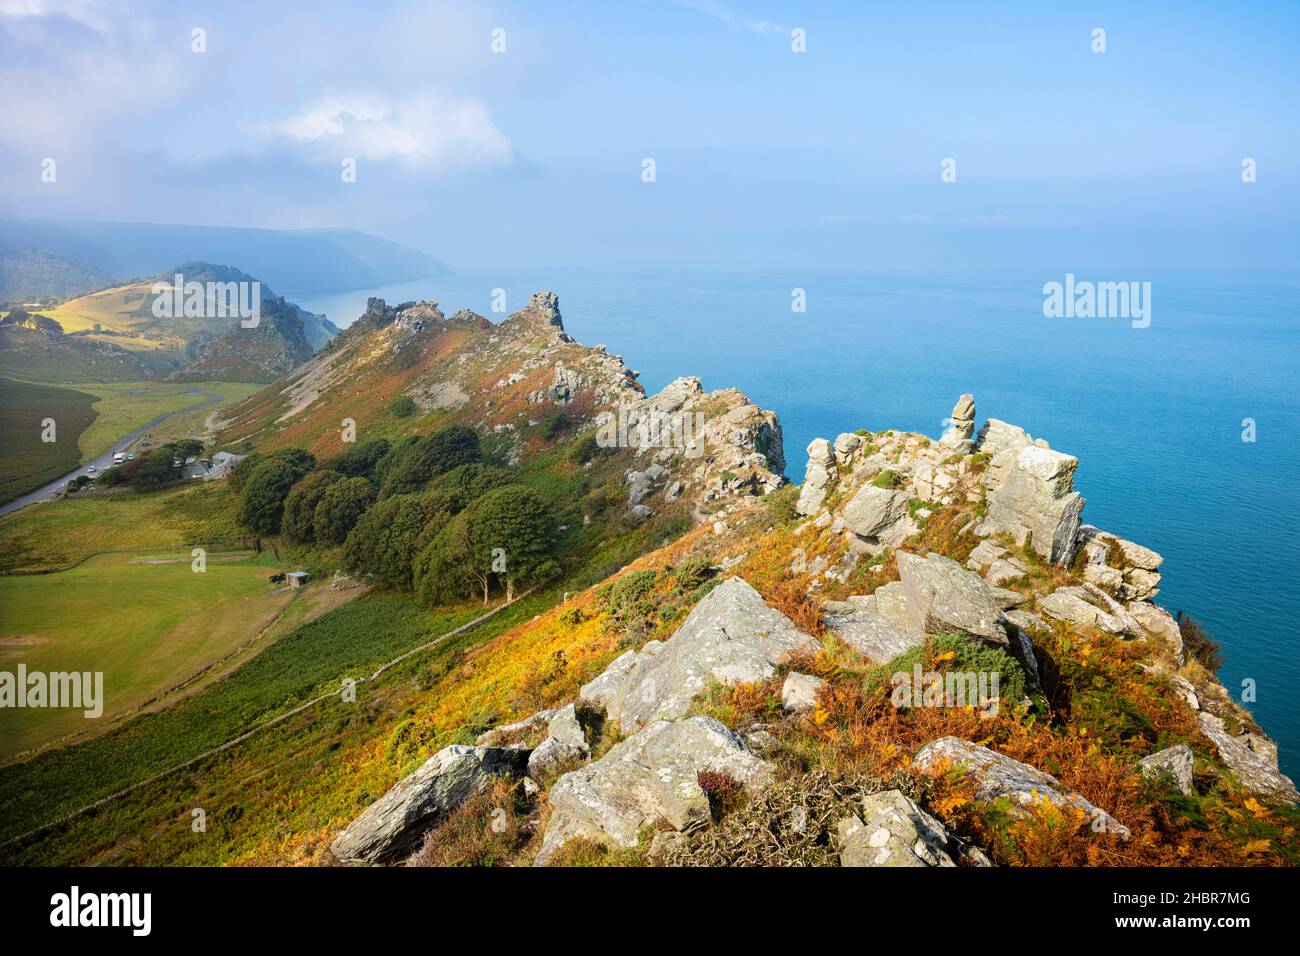 Parc national Valley of the Rocks Exmoor près de Lynton et Lynmouth Devon Angleterre GB Europe Banque D'Images